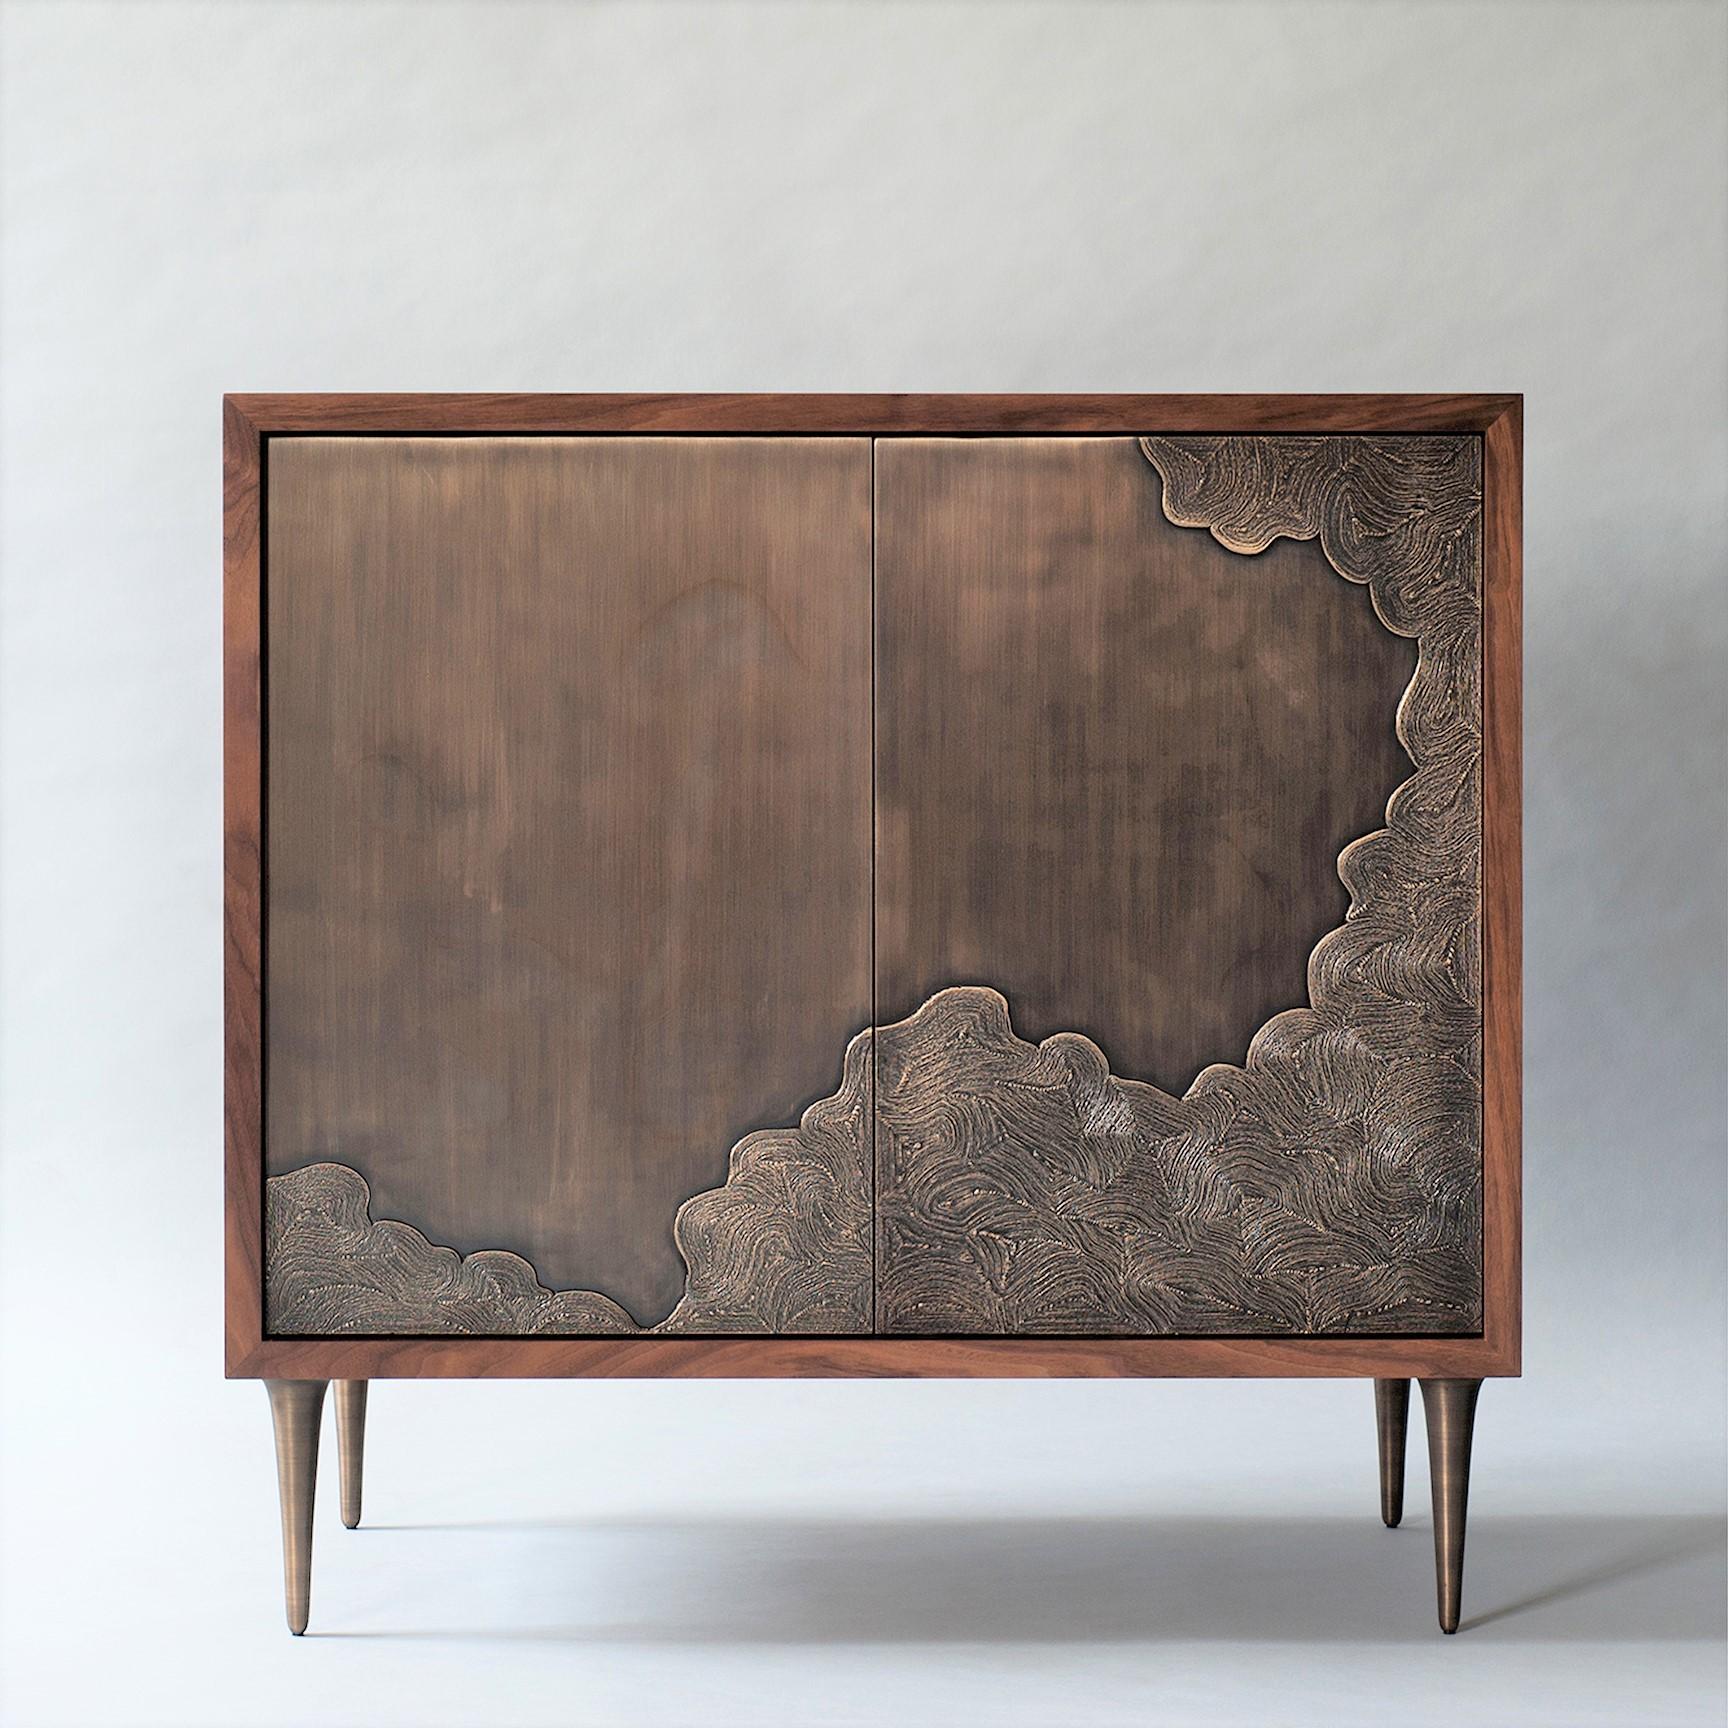 Named after the Japanese word for wave, the Nami Collection showcases bronzework in the form of swelling surf. The two-door cabinet’s richly textured, push-to-open fronts were cast using coiled thread—a nod to the ancient Dhokra creations of nomadic